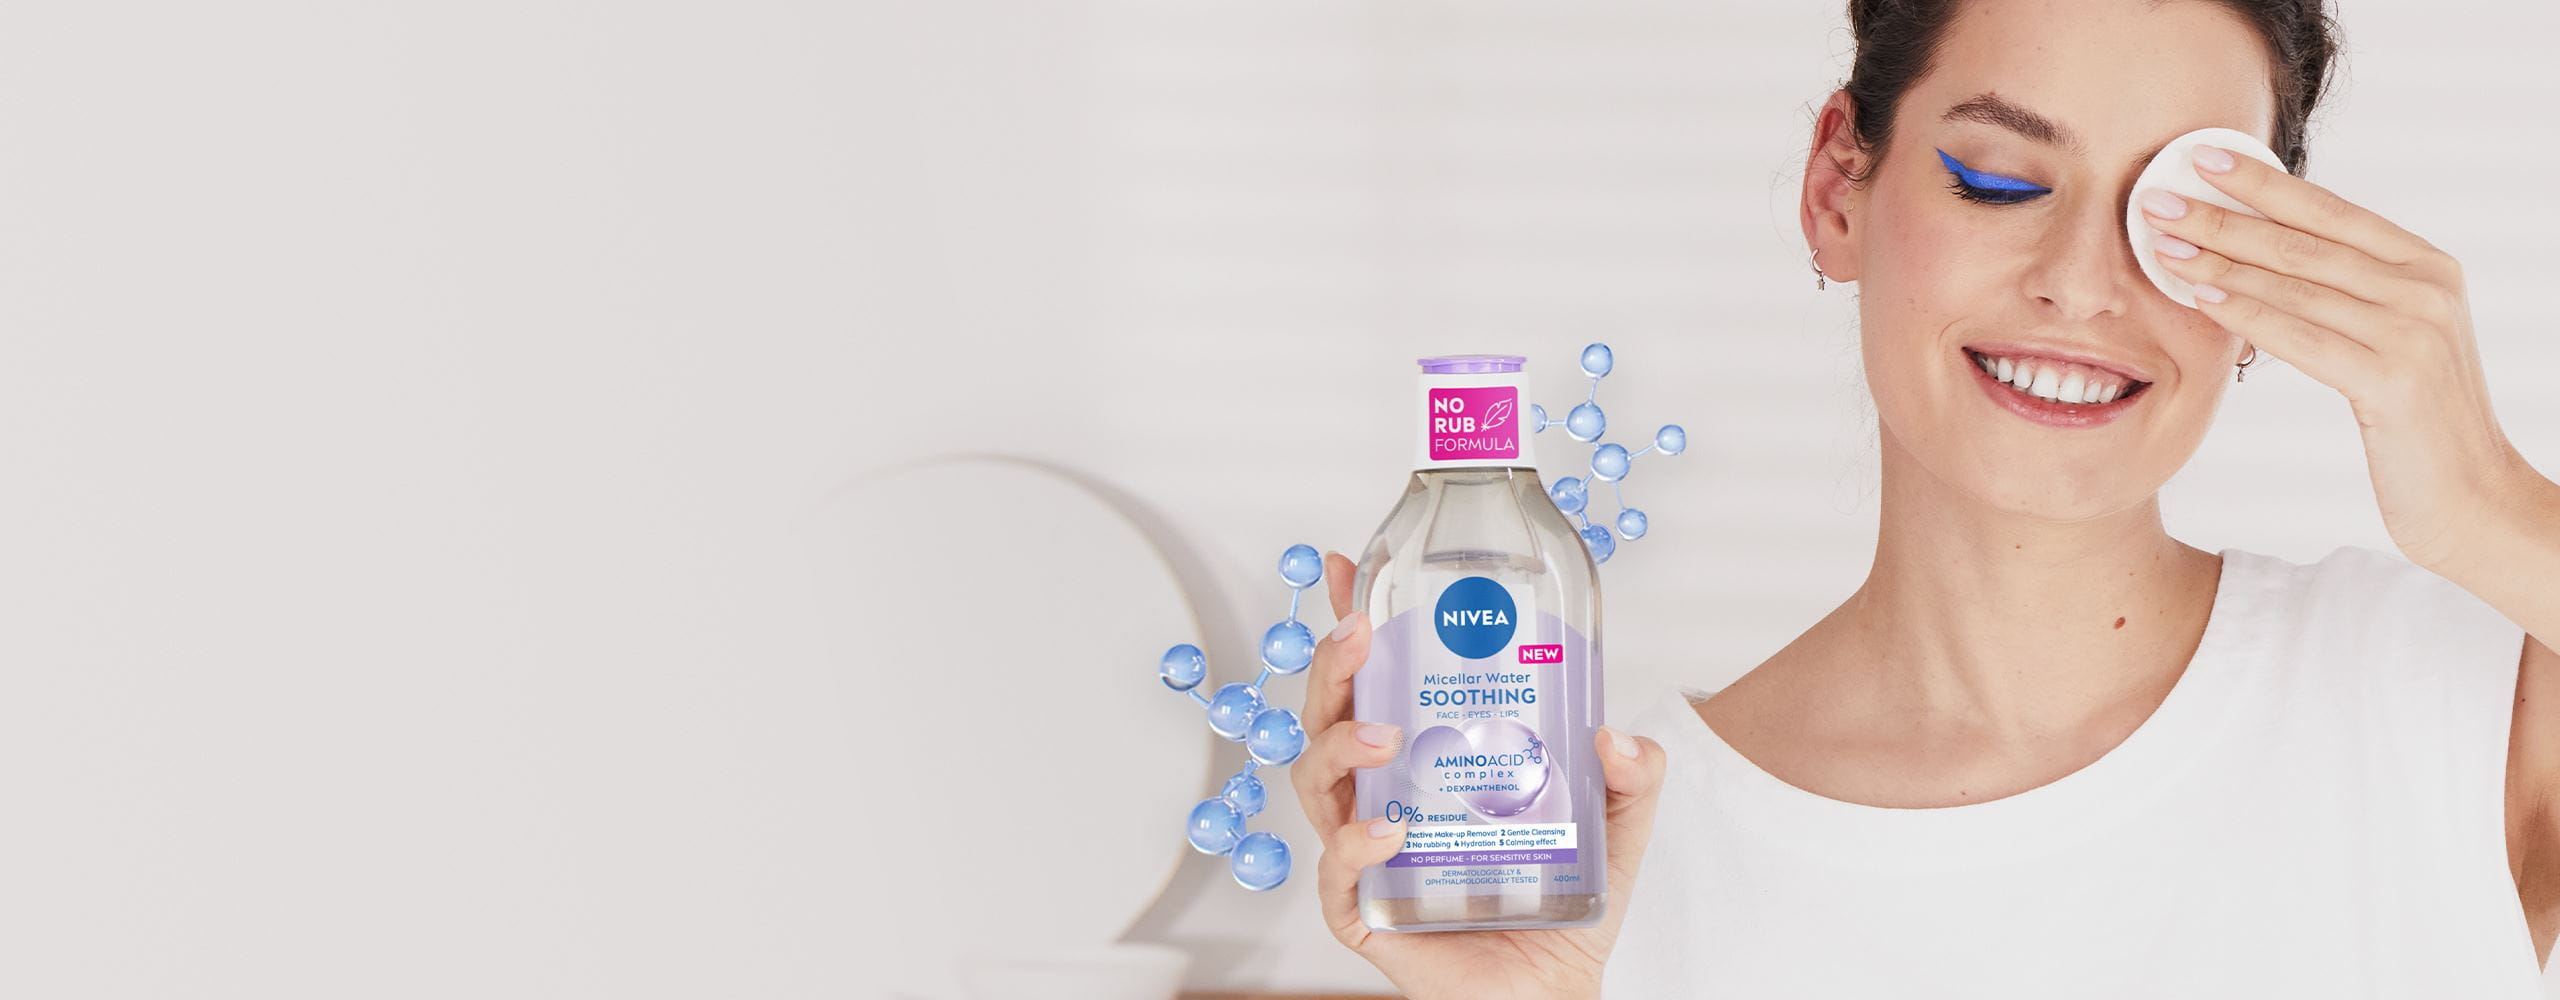 A woman has removed heavy blue eye make-up with the NEW NIVEA Micellar Water and shows the cotton pad. Next to her is the NEW NIVEA Micellar Water package.